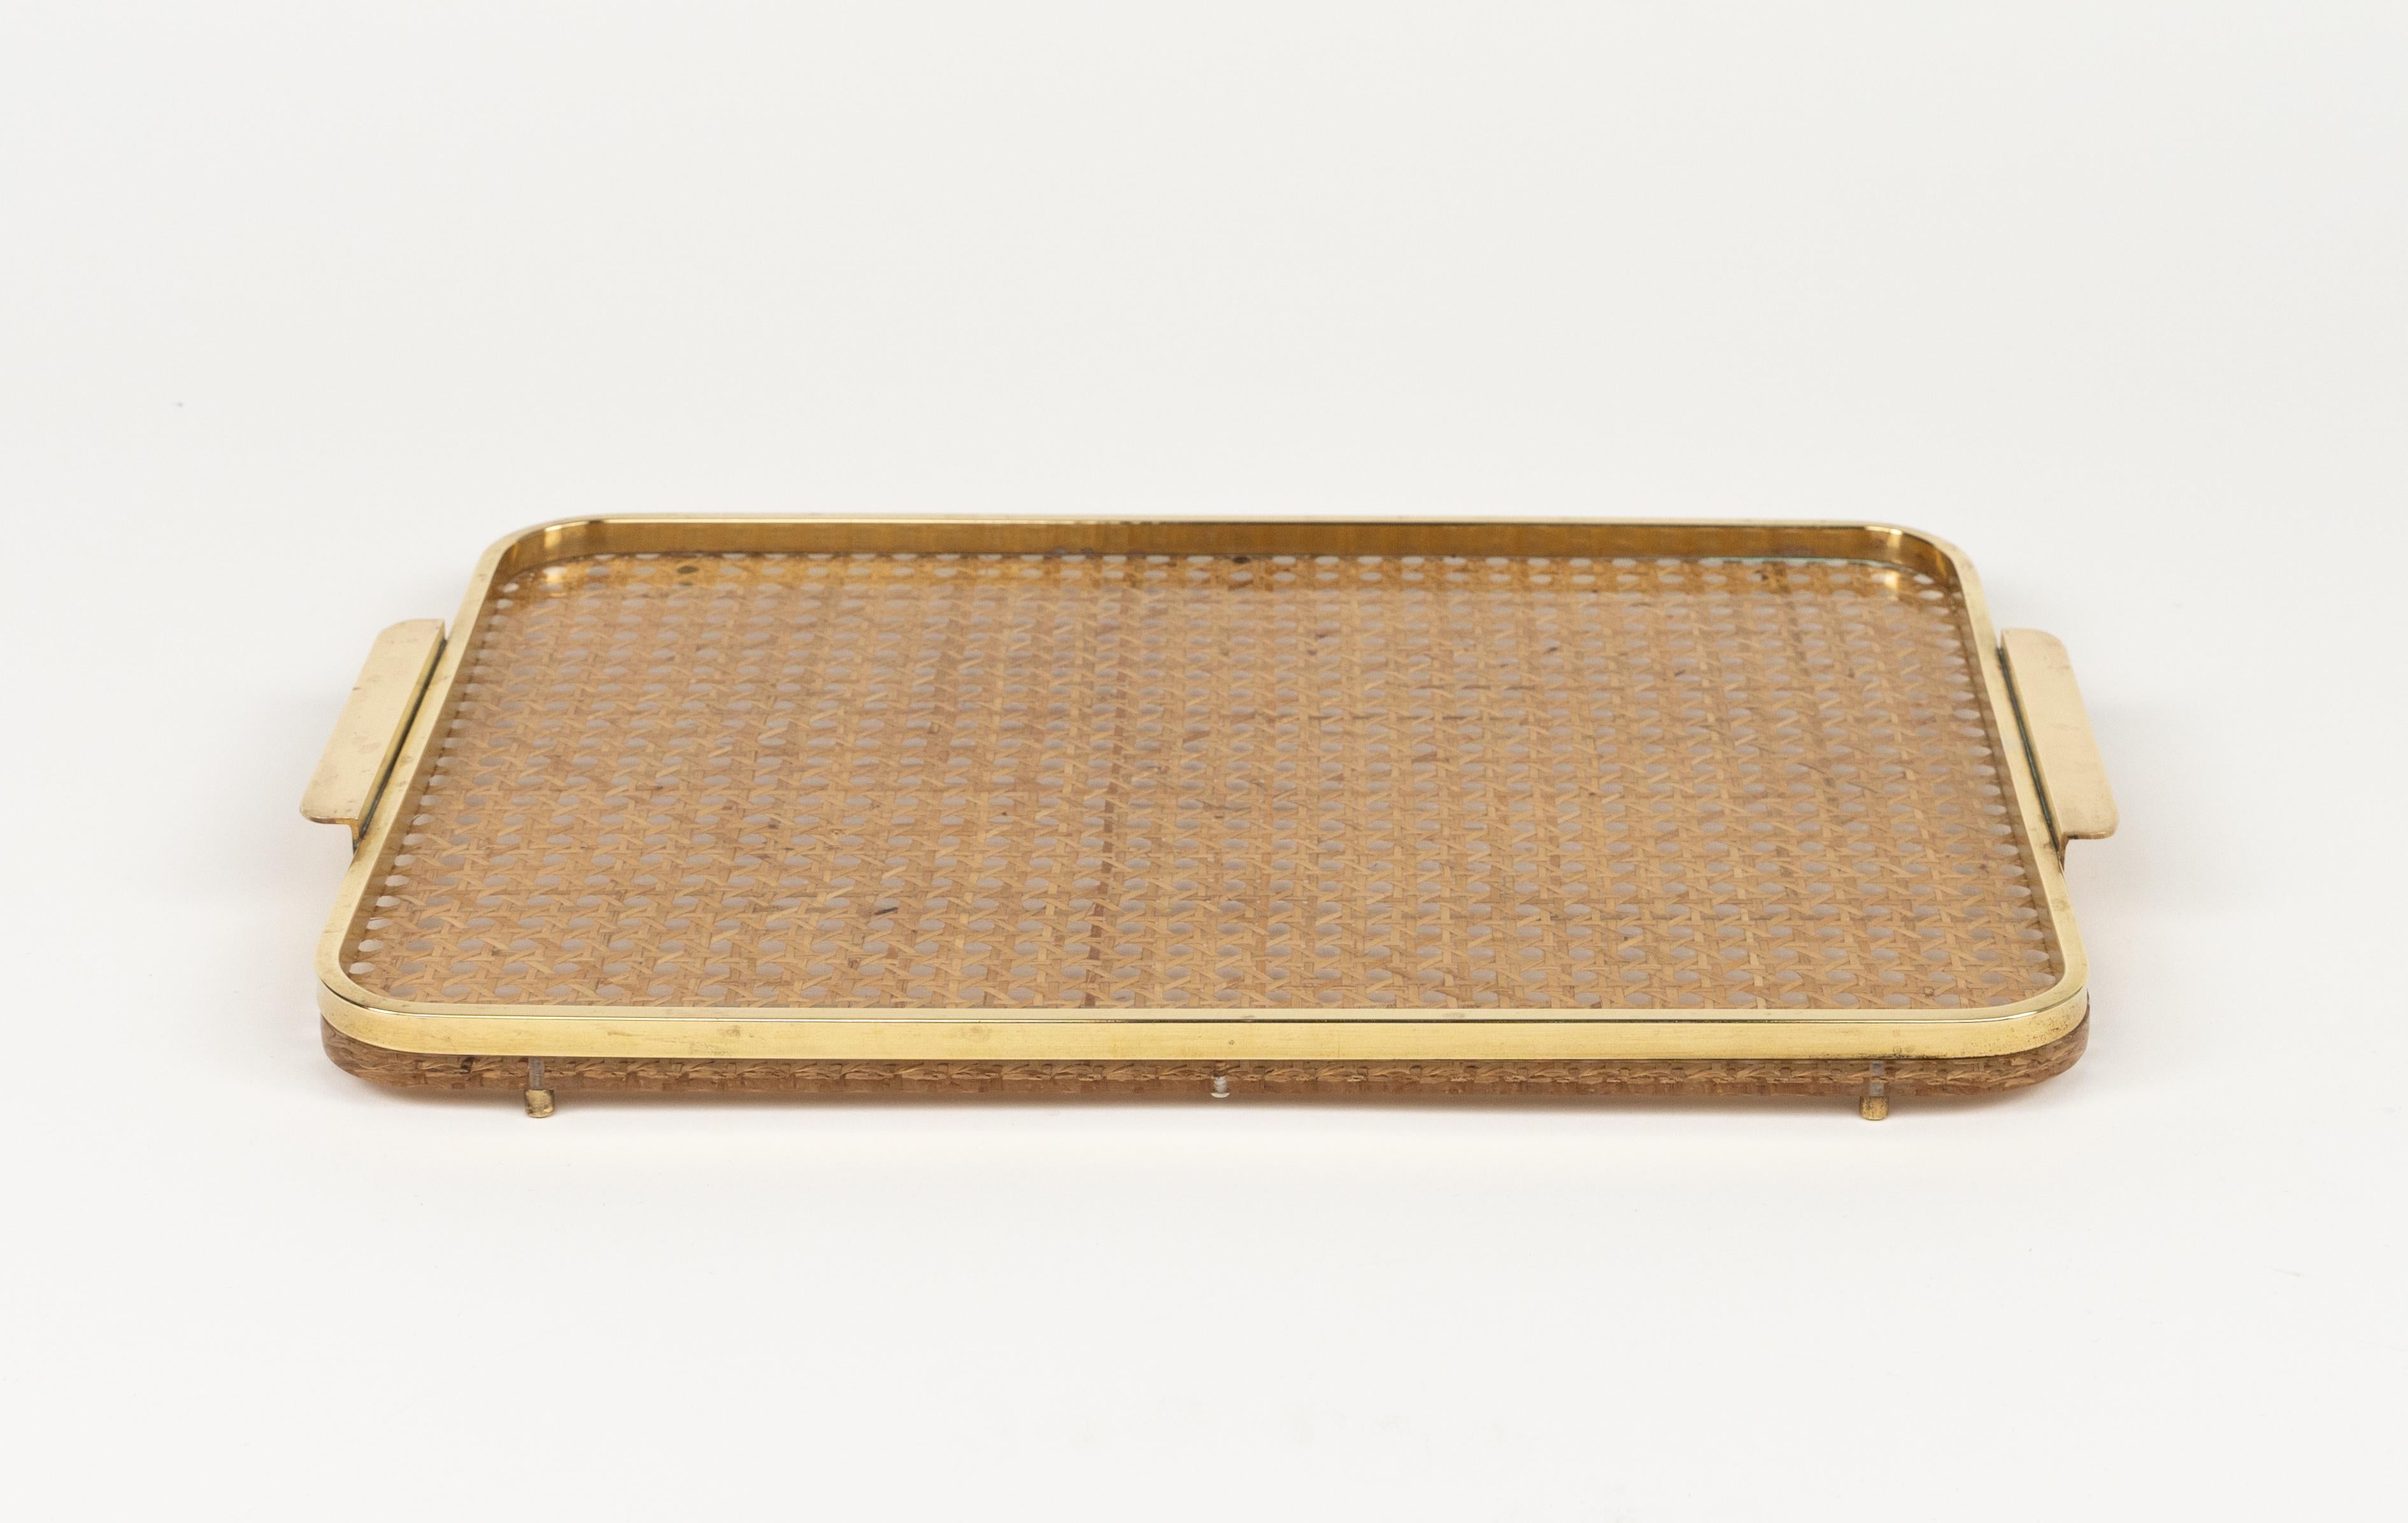 Serving Tray in Lucite, Rattan and Brass Christian Dior Style, Italy, 1970s For Sale 5